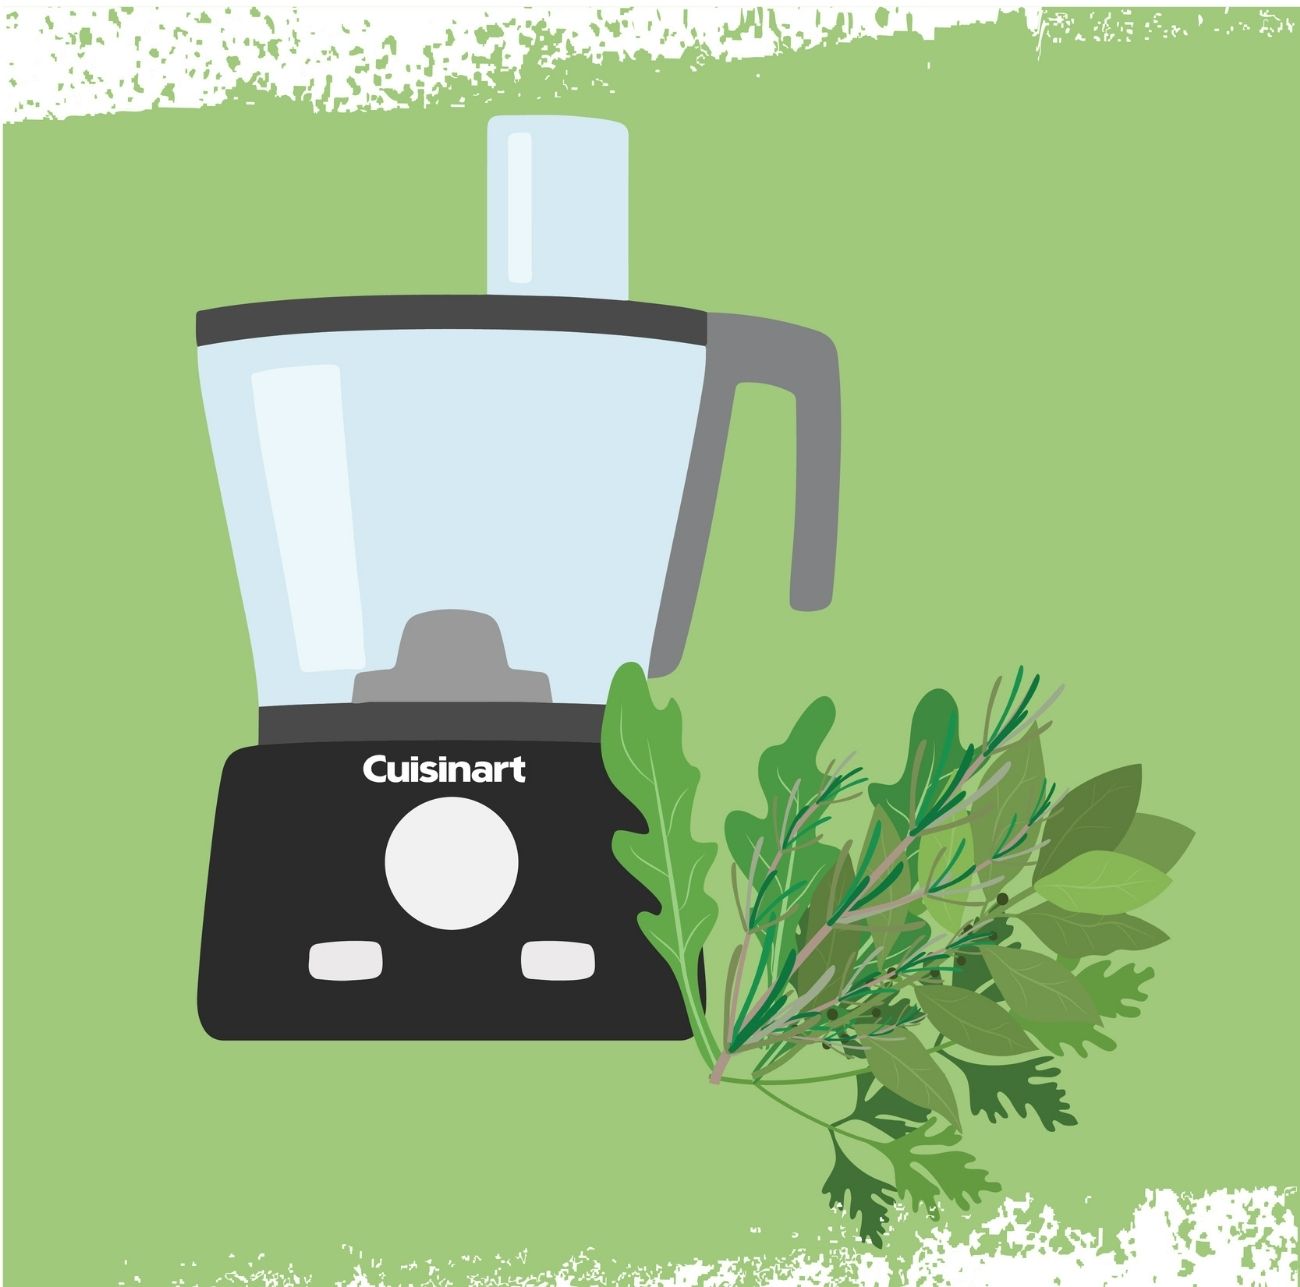 Process the right amount of herbs at a time to get the best finish